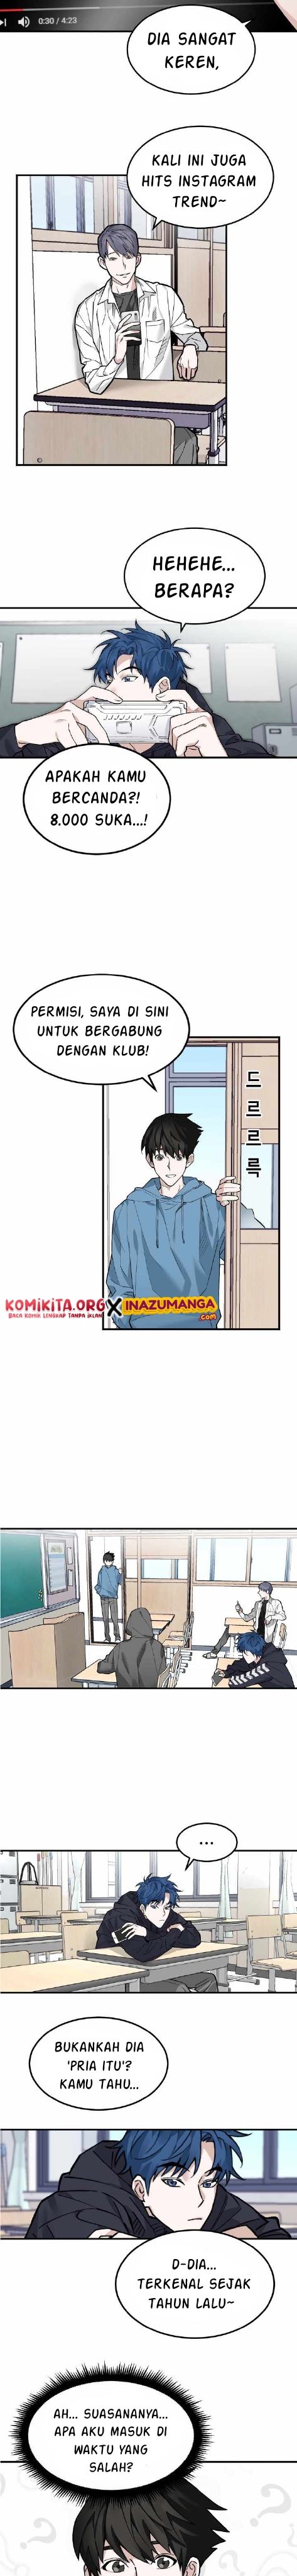 The Extreme Chapter 1 - 161